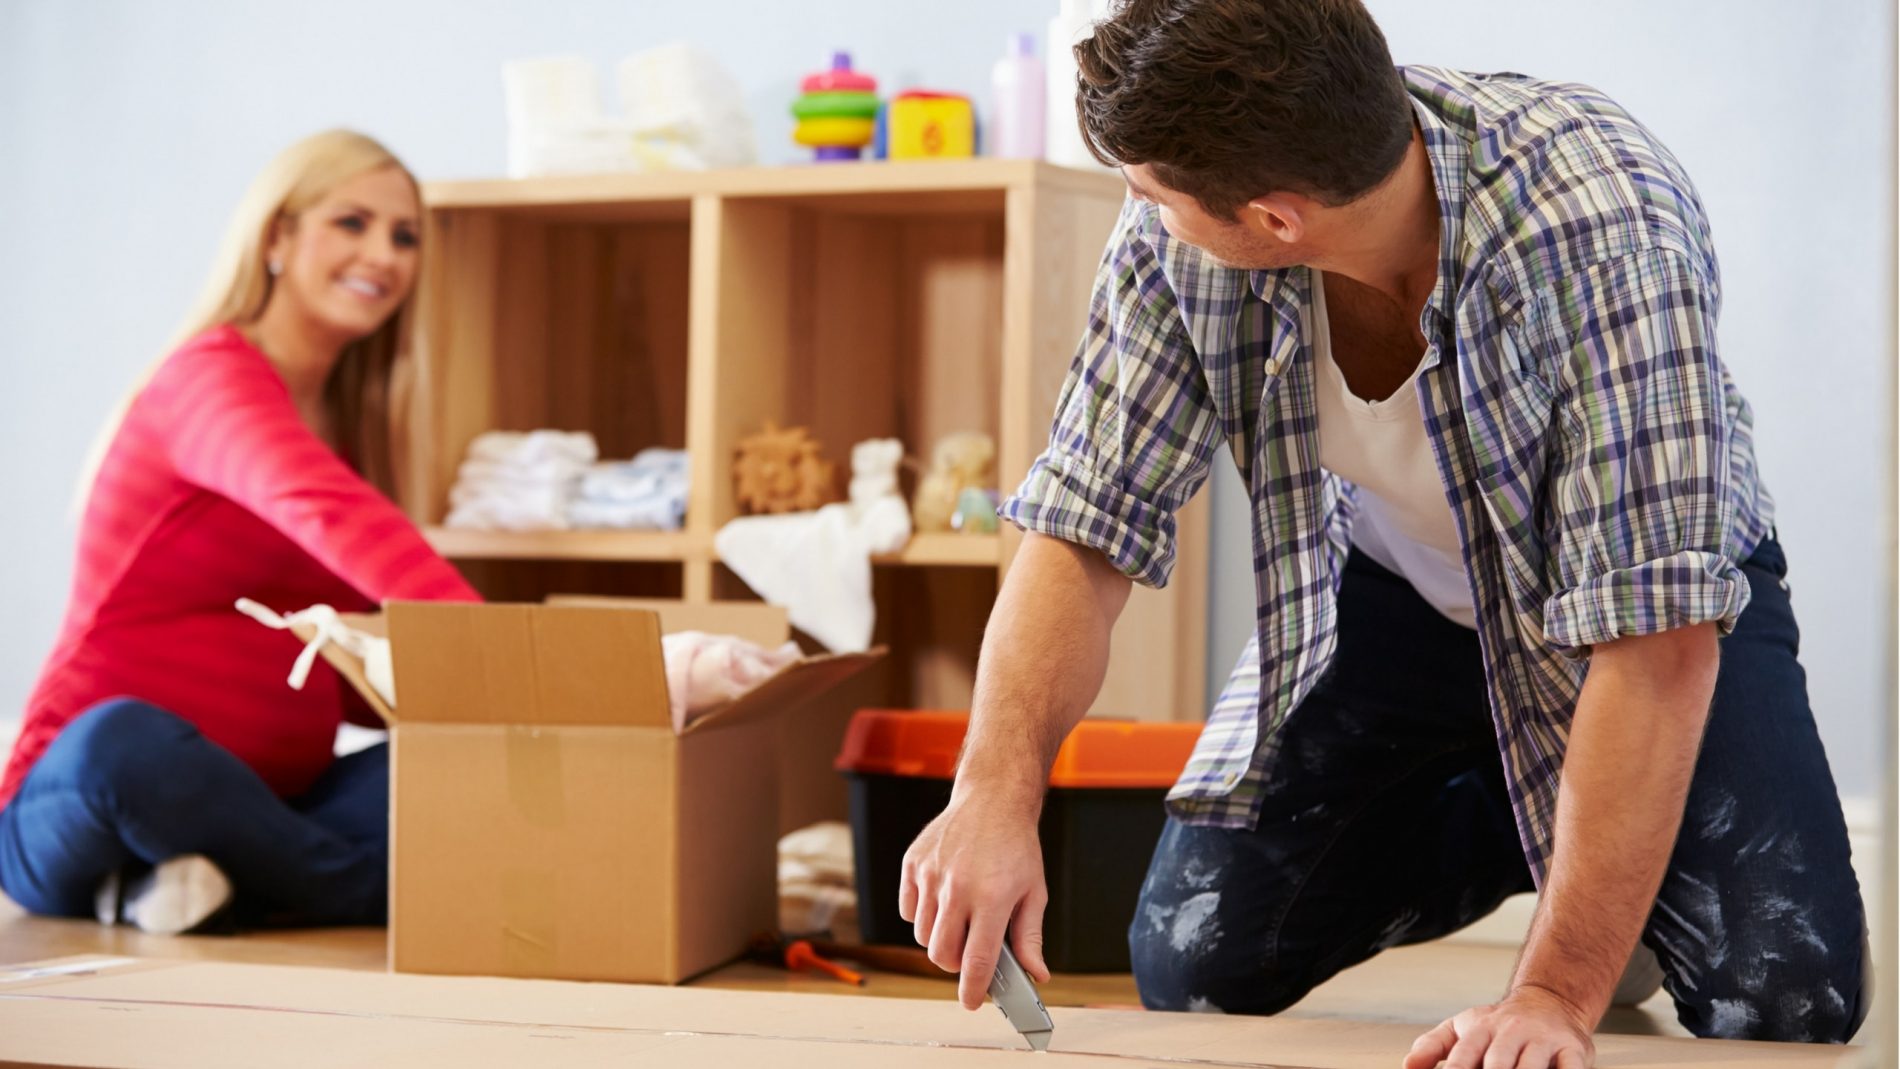 Top tips for assembling flat pack furniture without any hassle